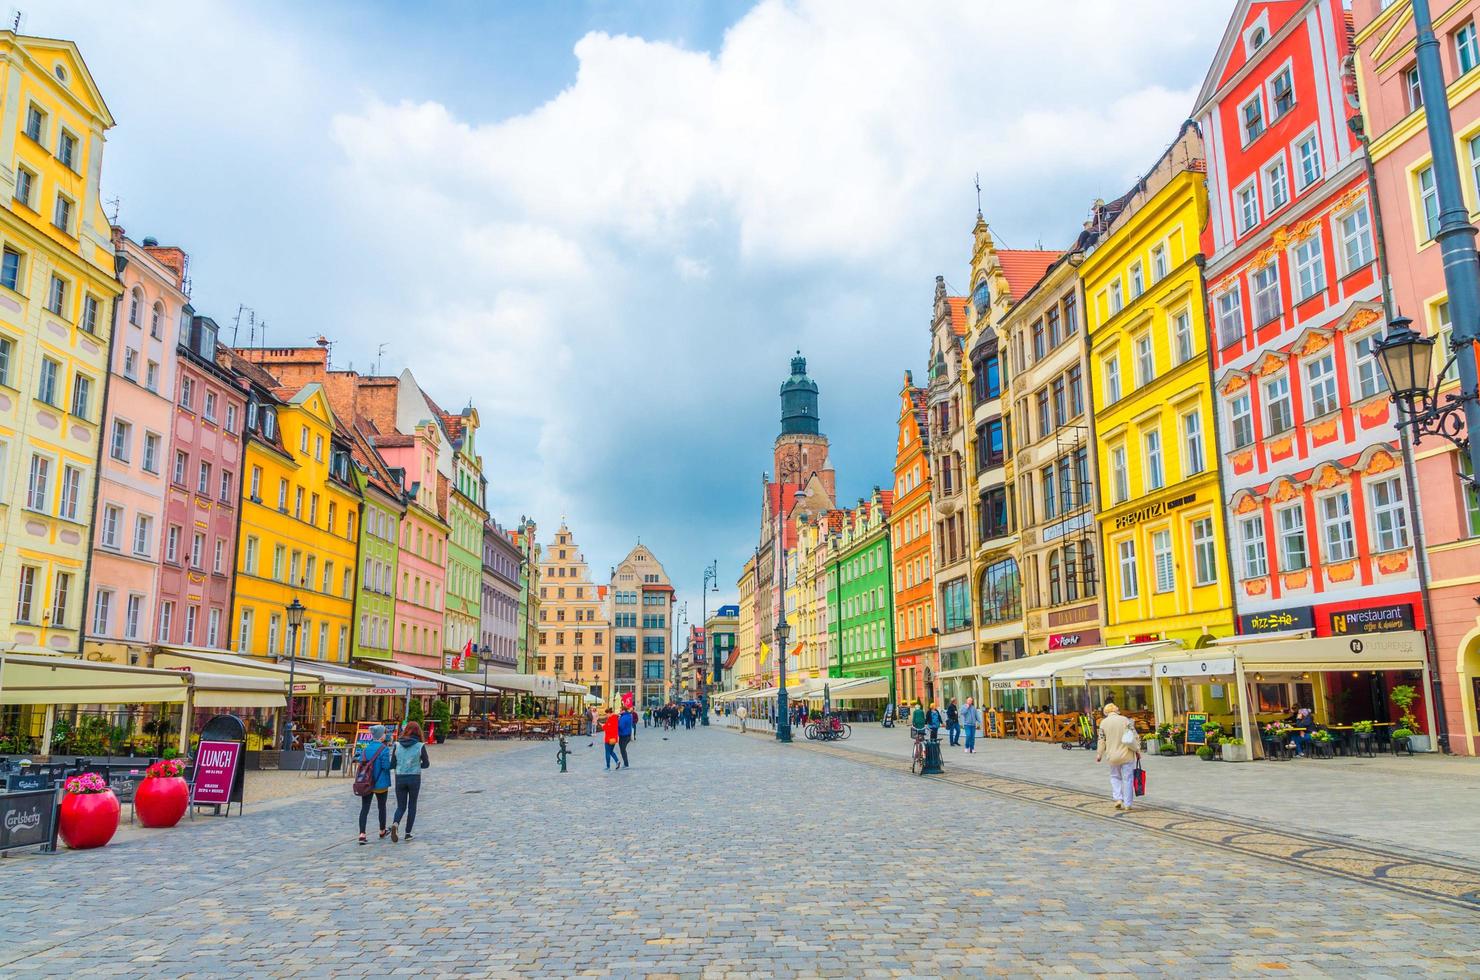 Wroclaw, Poland, May 7, 2019 old town historical city centre, colorful buildings with multicolored facade, St. Elizabeth Minor Basilica Garrison catholic Church on cobblestone Rynek Market Square photo